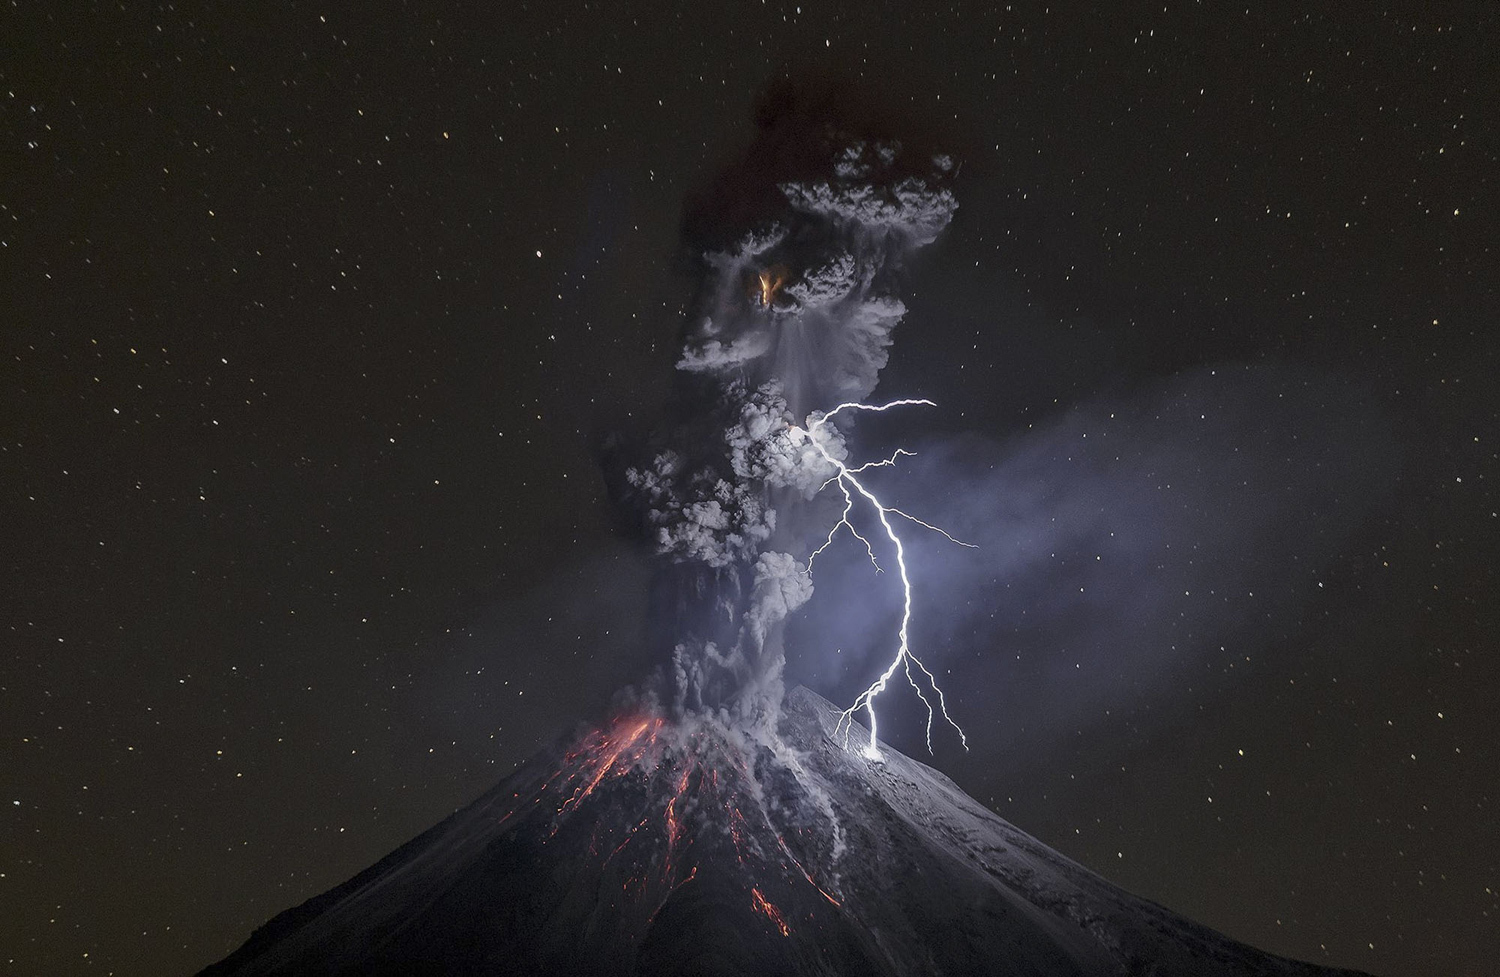 'The Power of Nature' by Sergio Tapiro Velasco. Courtesy of National Geographic.